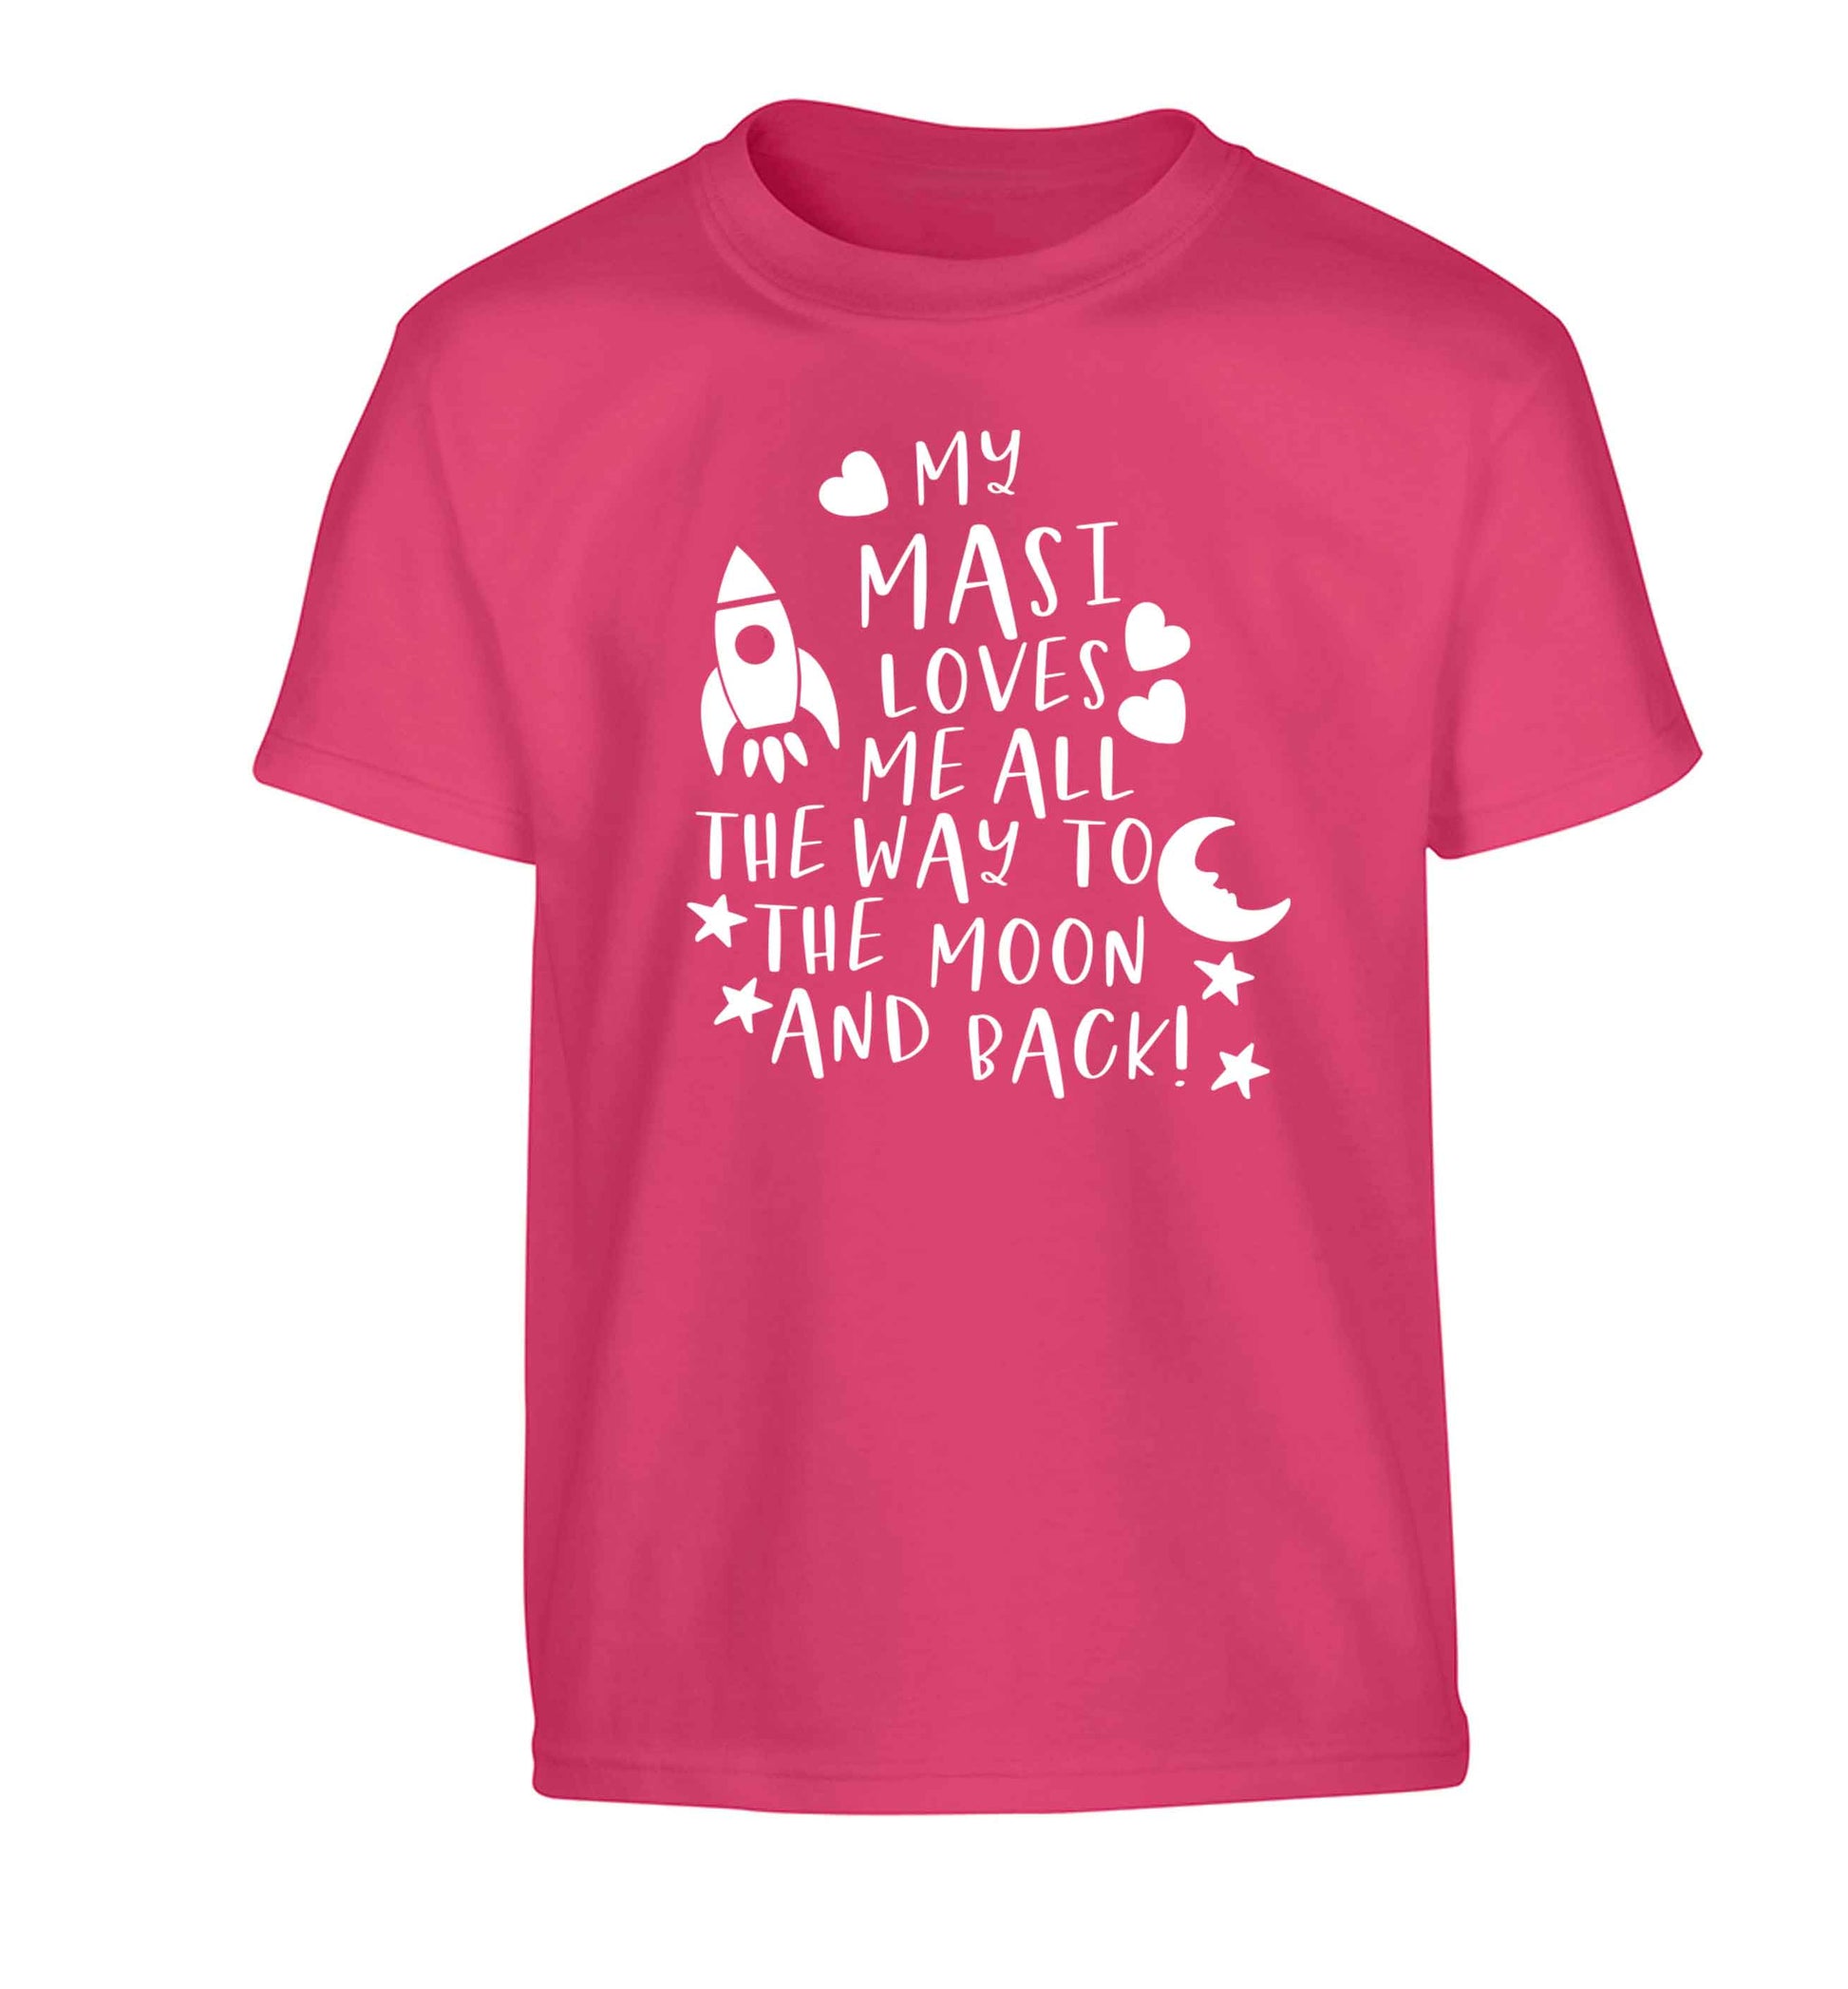 My masi loves me all the way to the moon and back Children's pink Tshirt 12-13 Years